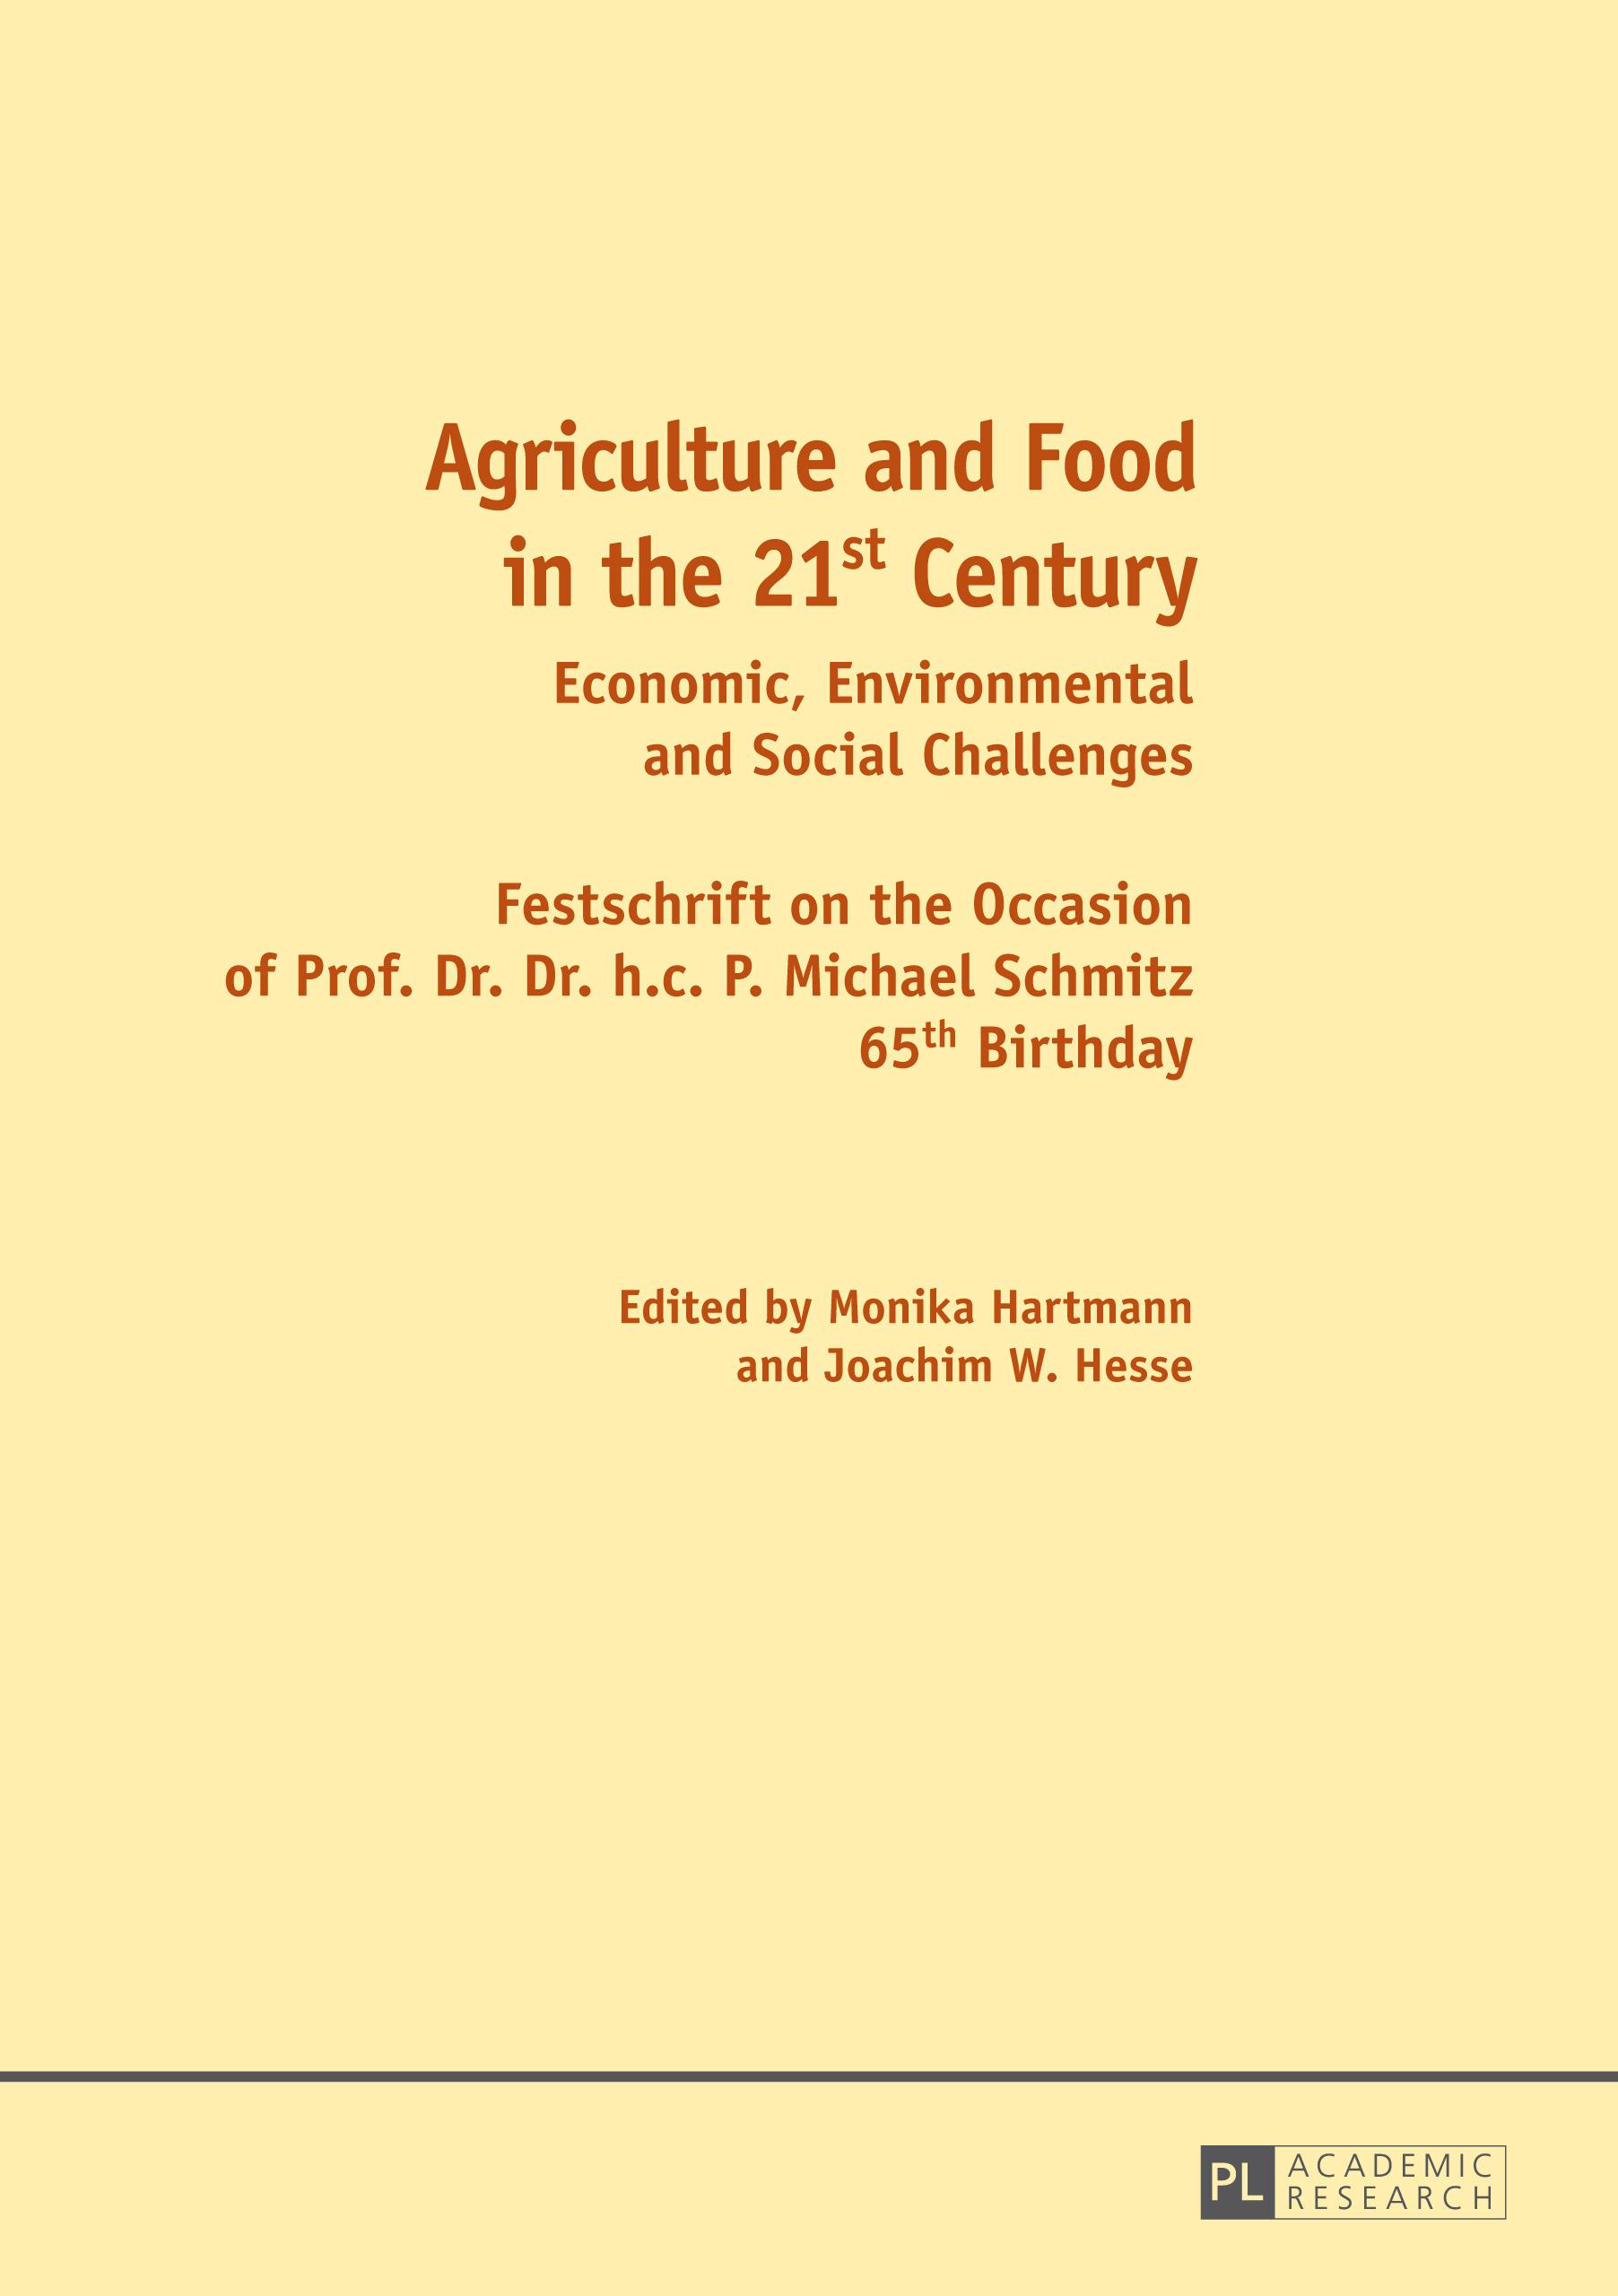 Agriculture and Food in the 21 st Century